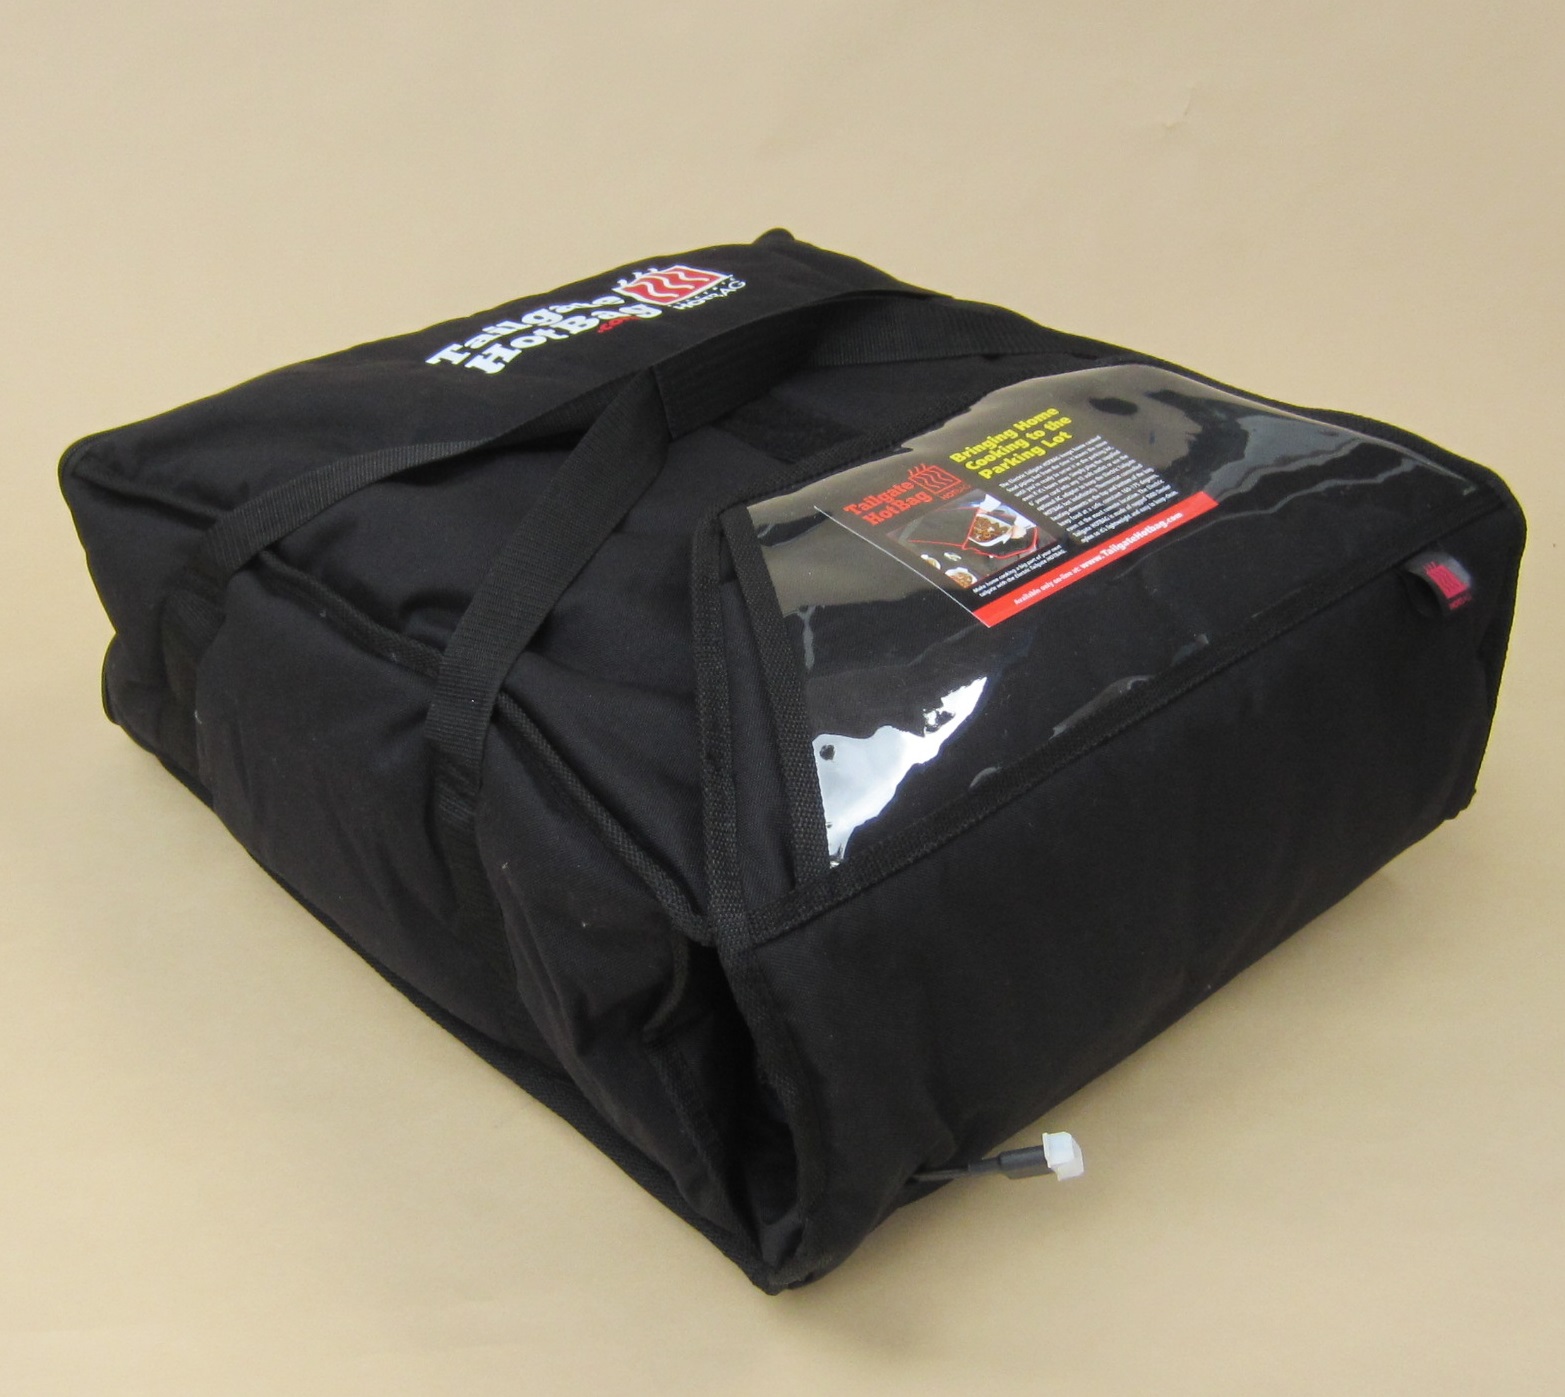 The Extra Wide Tailgate Hotbag heats large food trays or three 18" pizzas